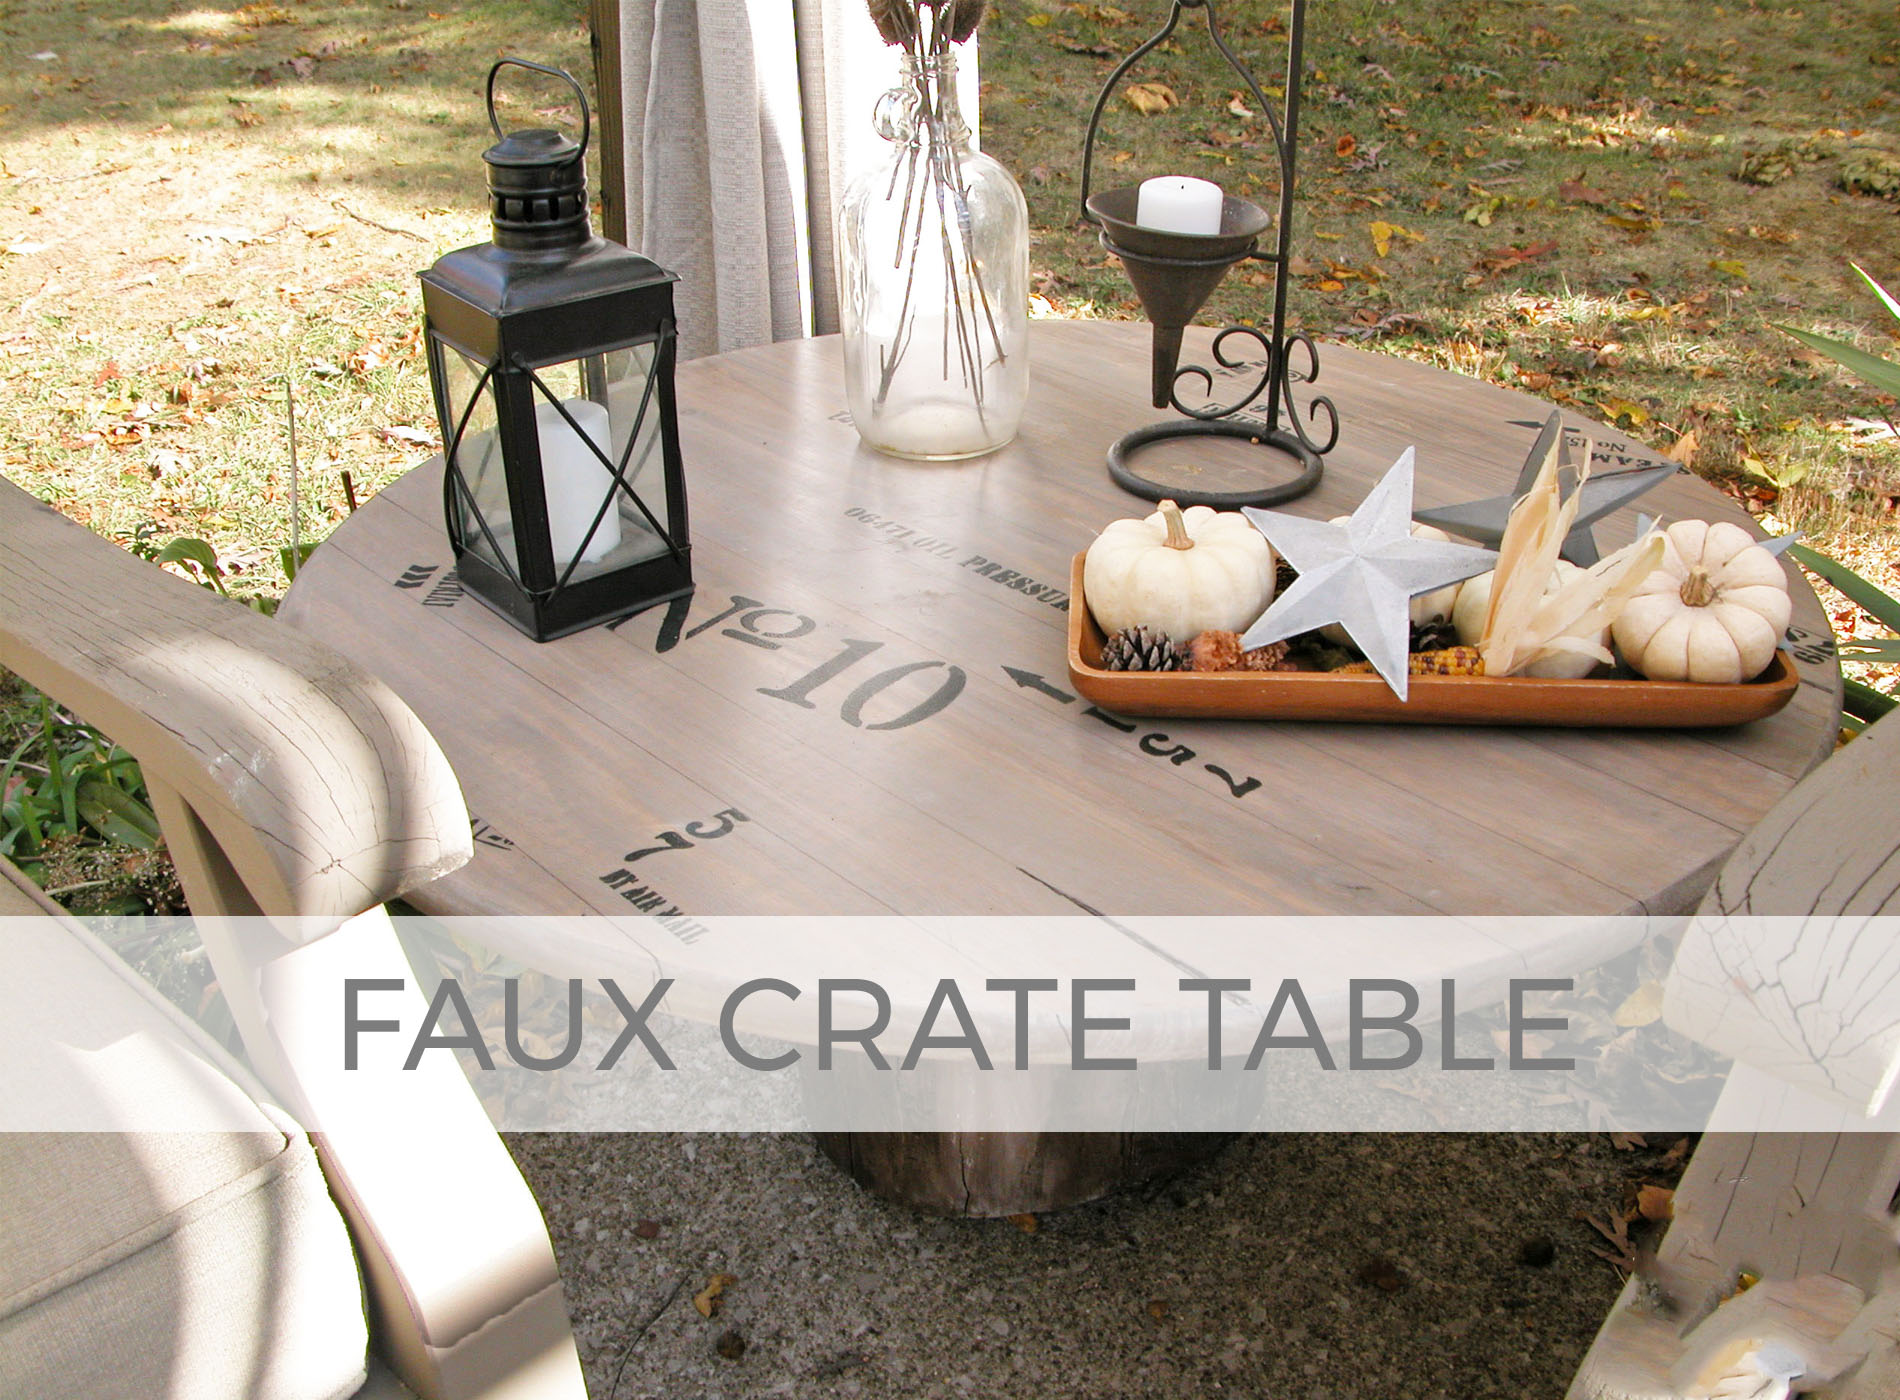 Build a Faux Crate Table with Prodigal Pieces | prodigalpieces.com